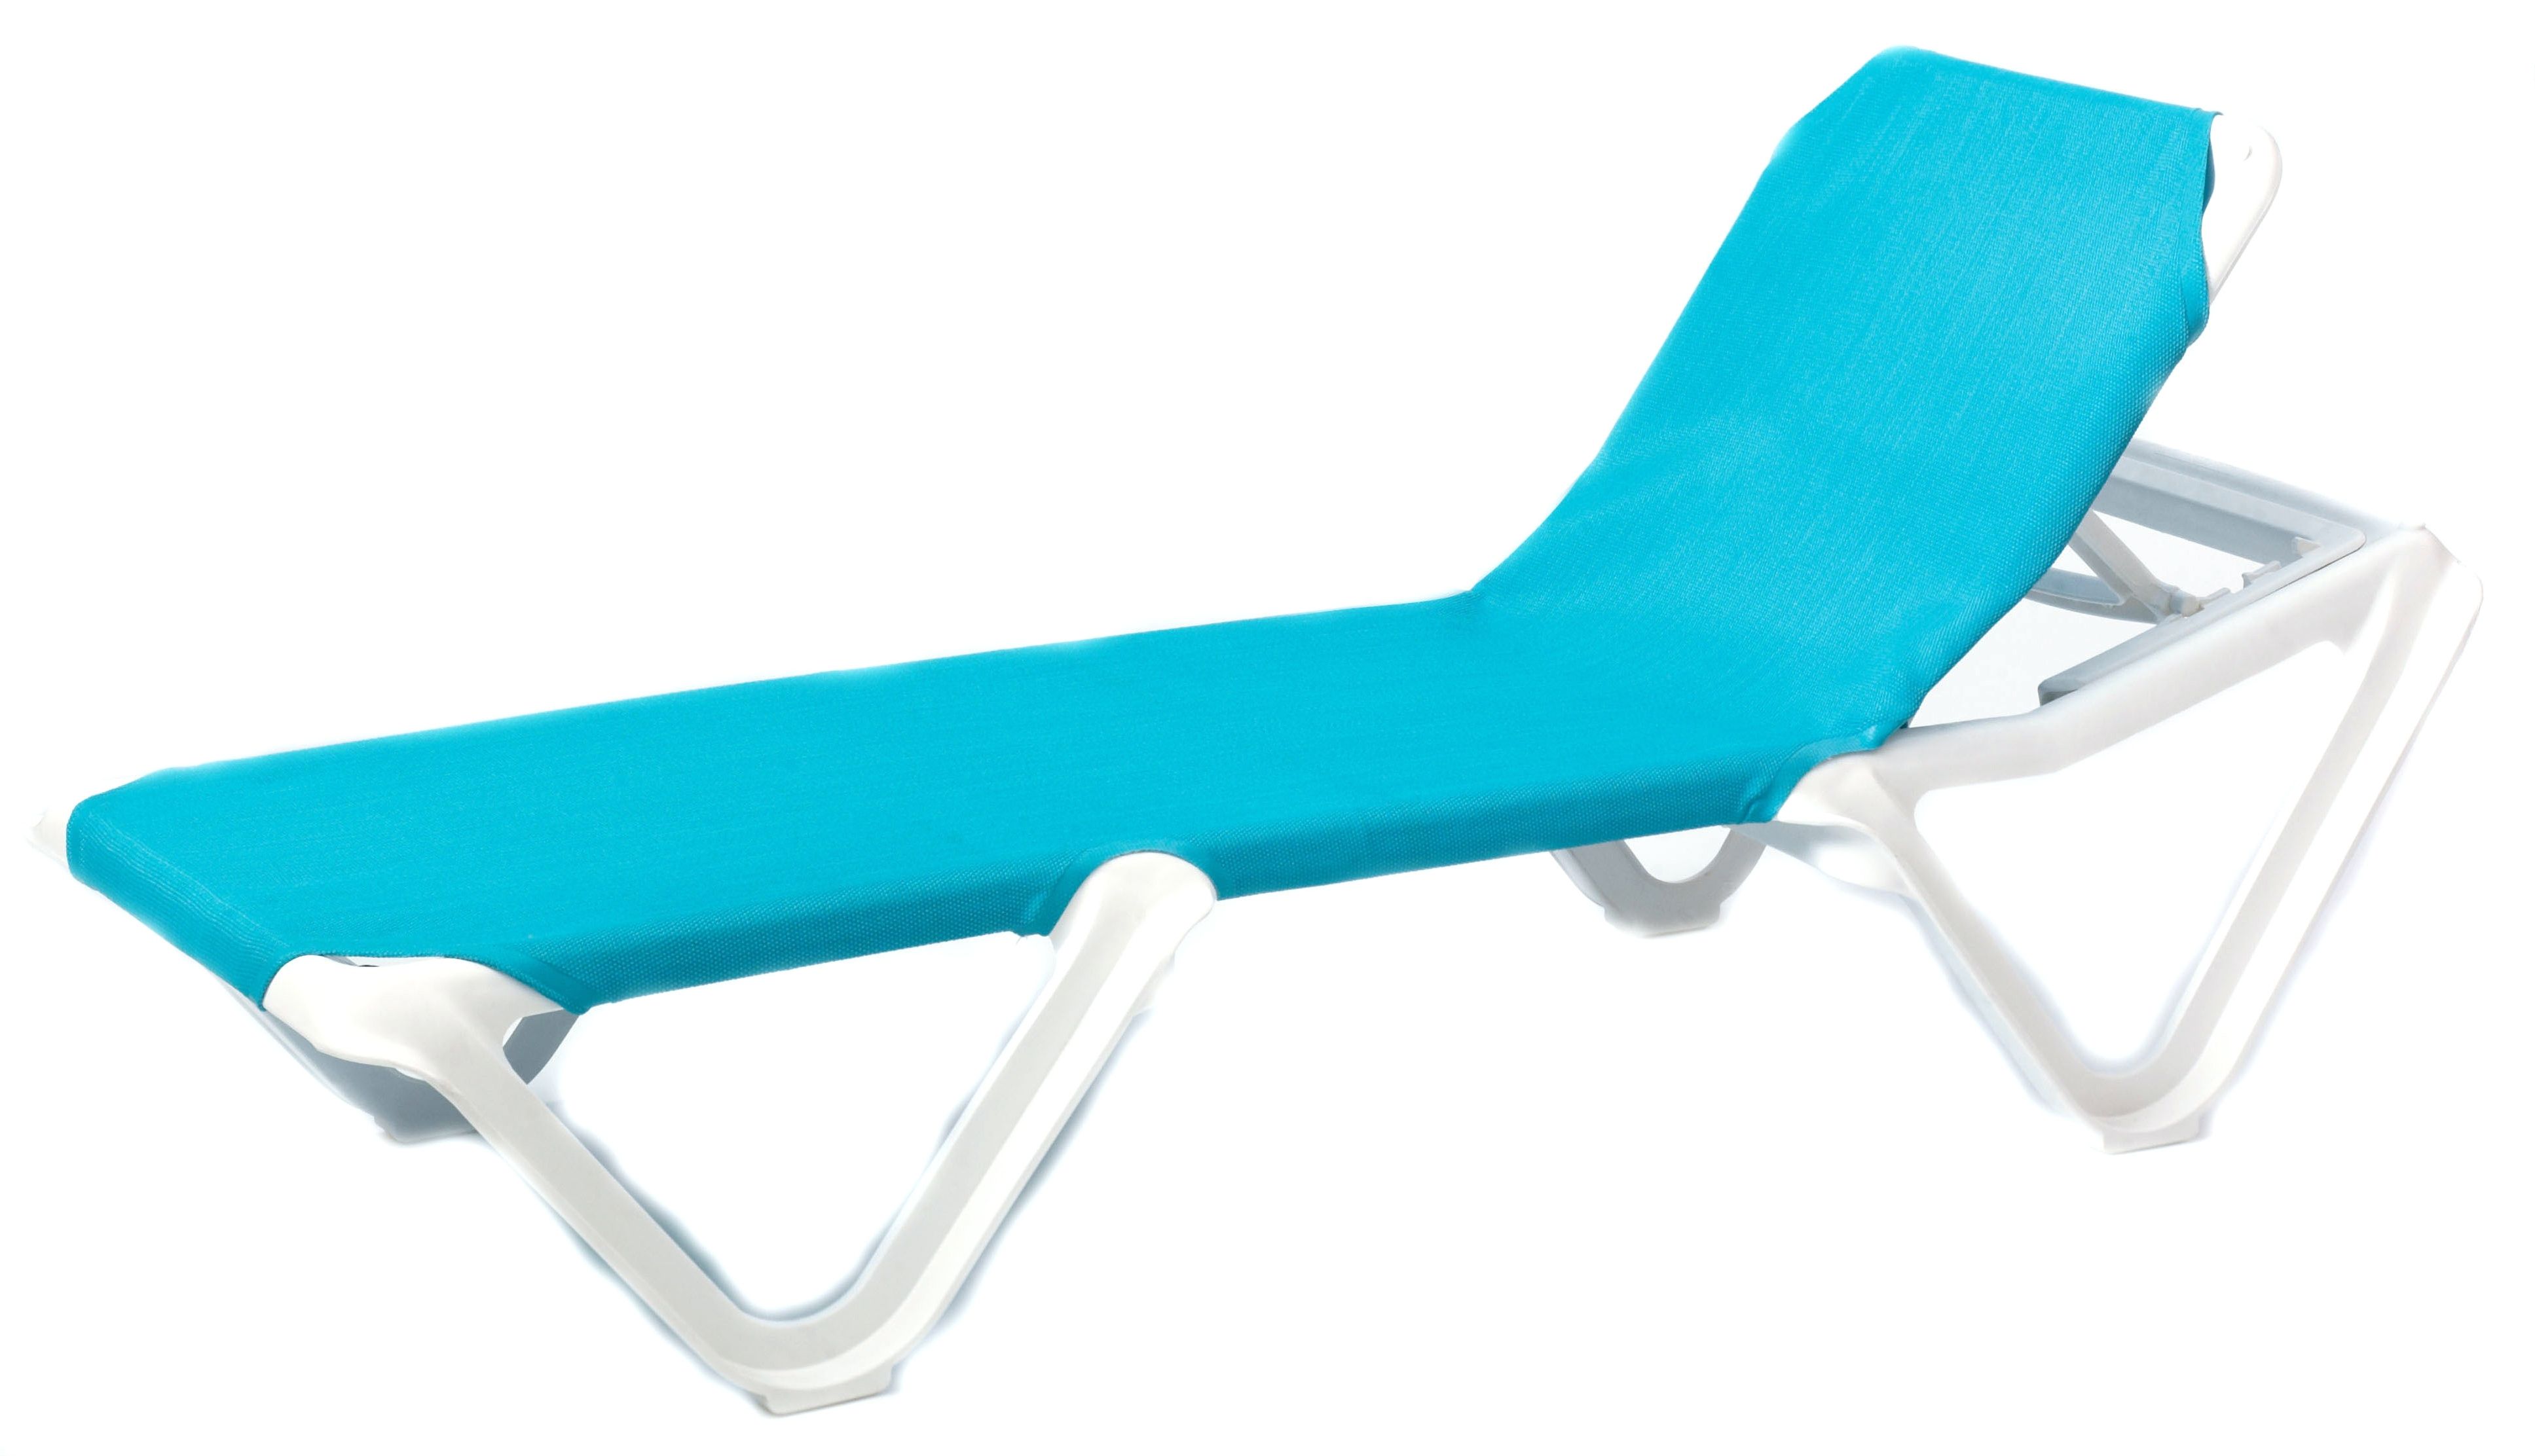 Commercial Grade Chaise Lounge Chairs Throughout Widely Used Hard Plastic Chaise Lounge Chairs • Lounge Chairs Ideas (View 13 of 15)